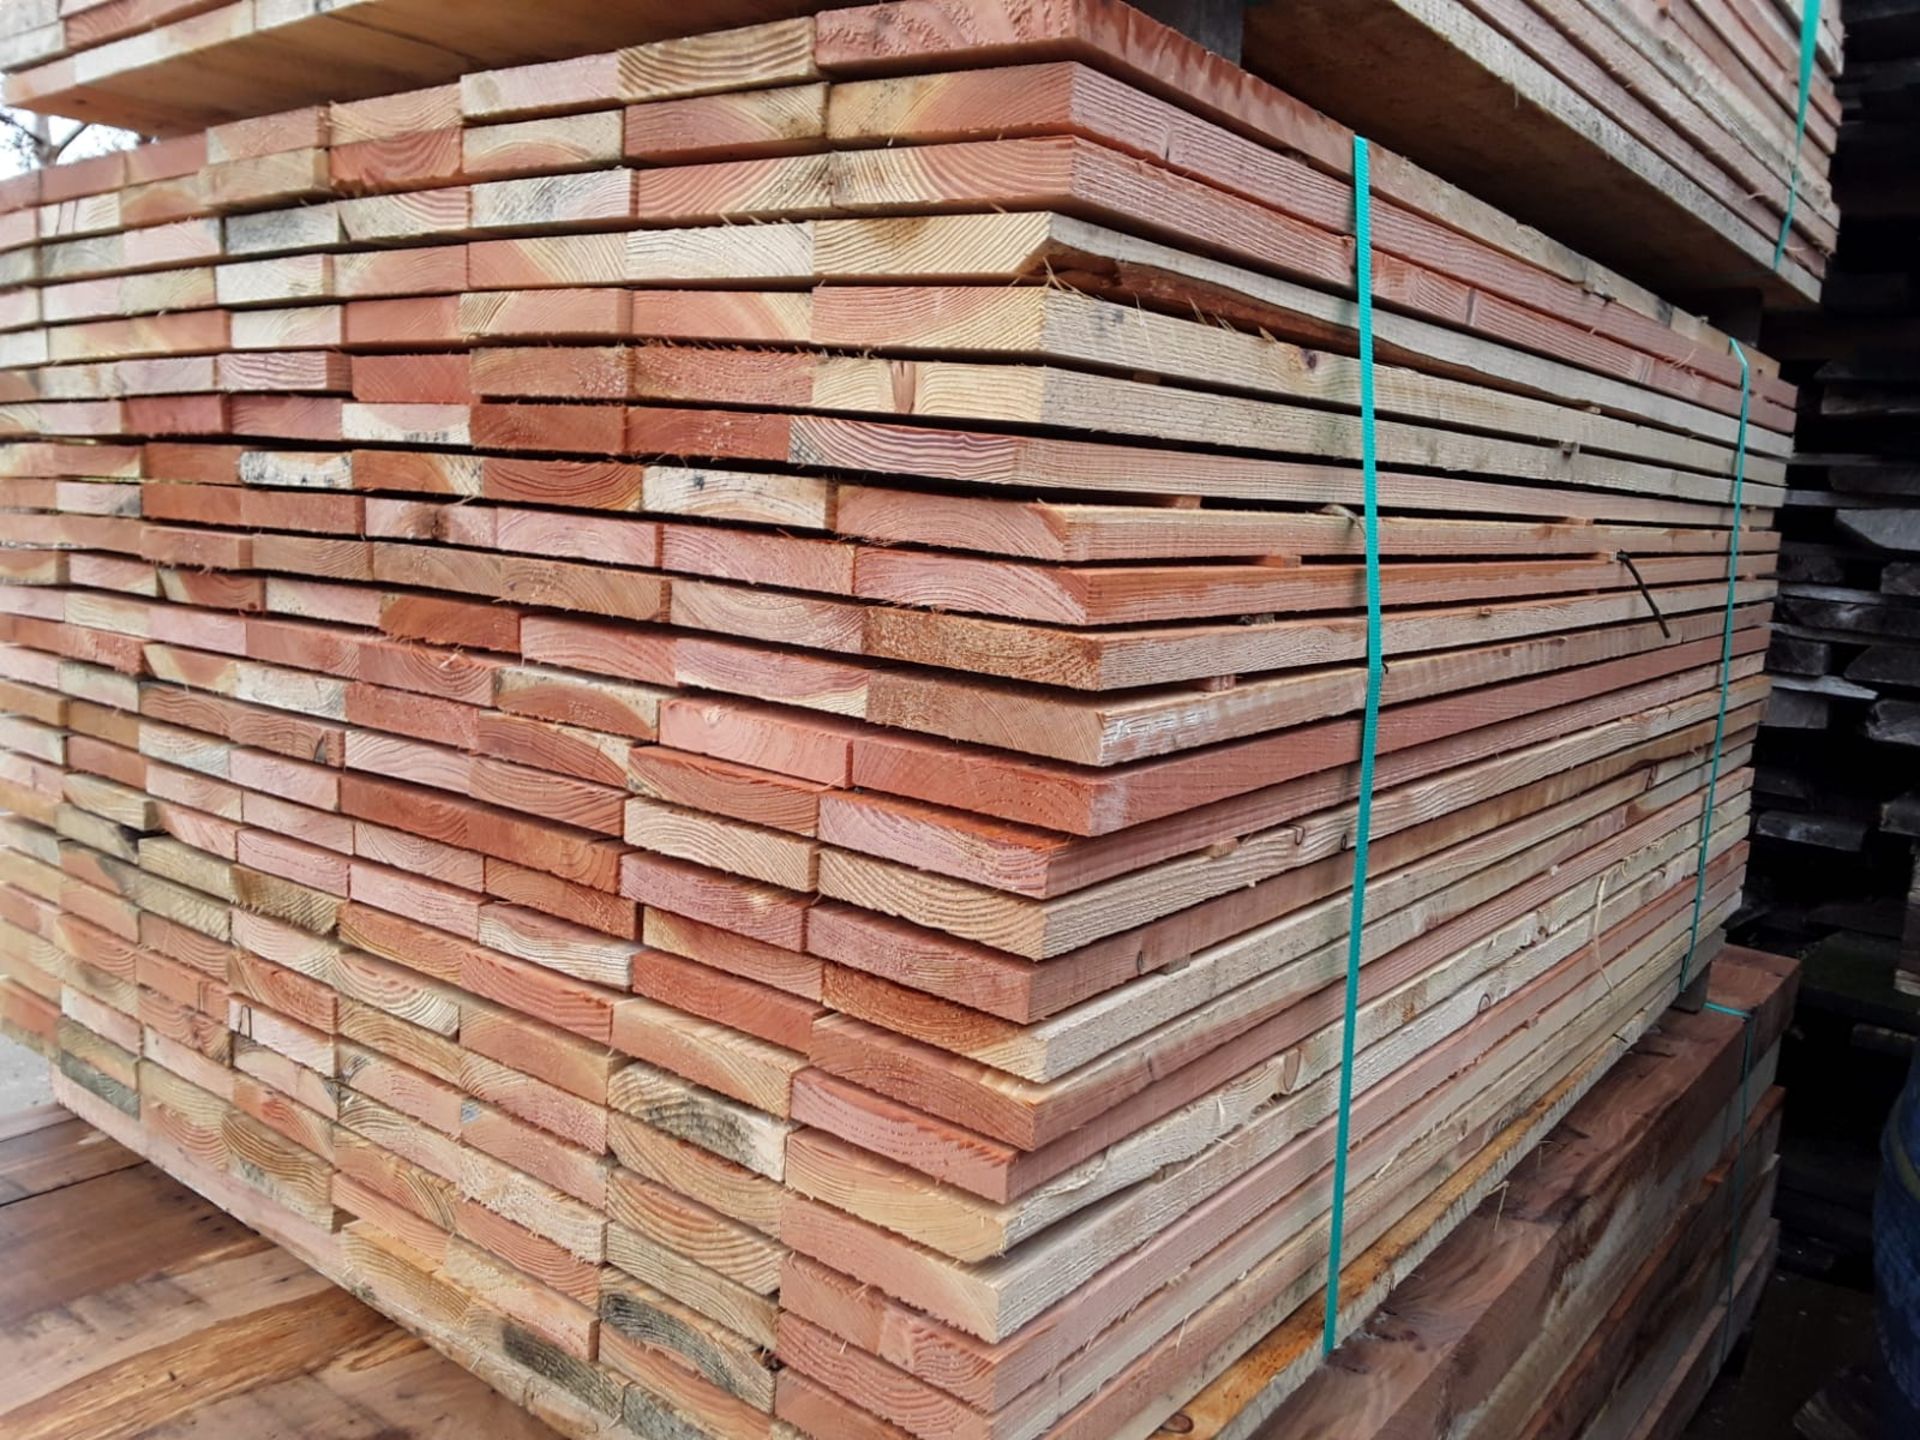 100x Softwood Unseasoned Sawn Mixed Larch / Douglas Fir Boards / Planks / Cladding - Image 10 of 12